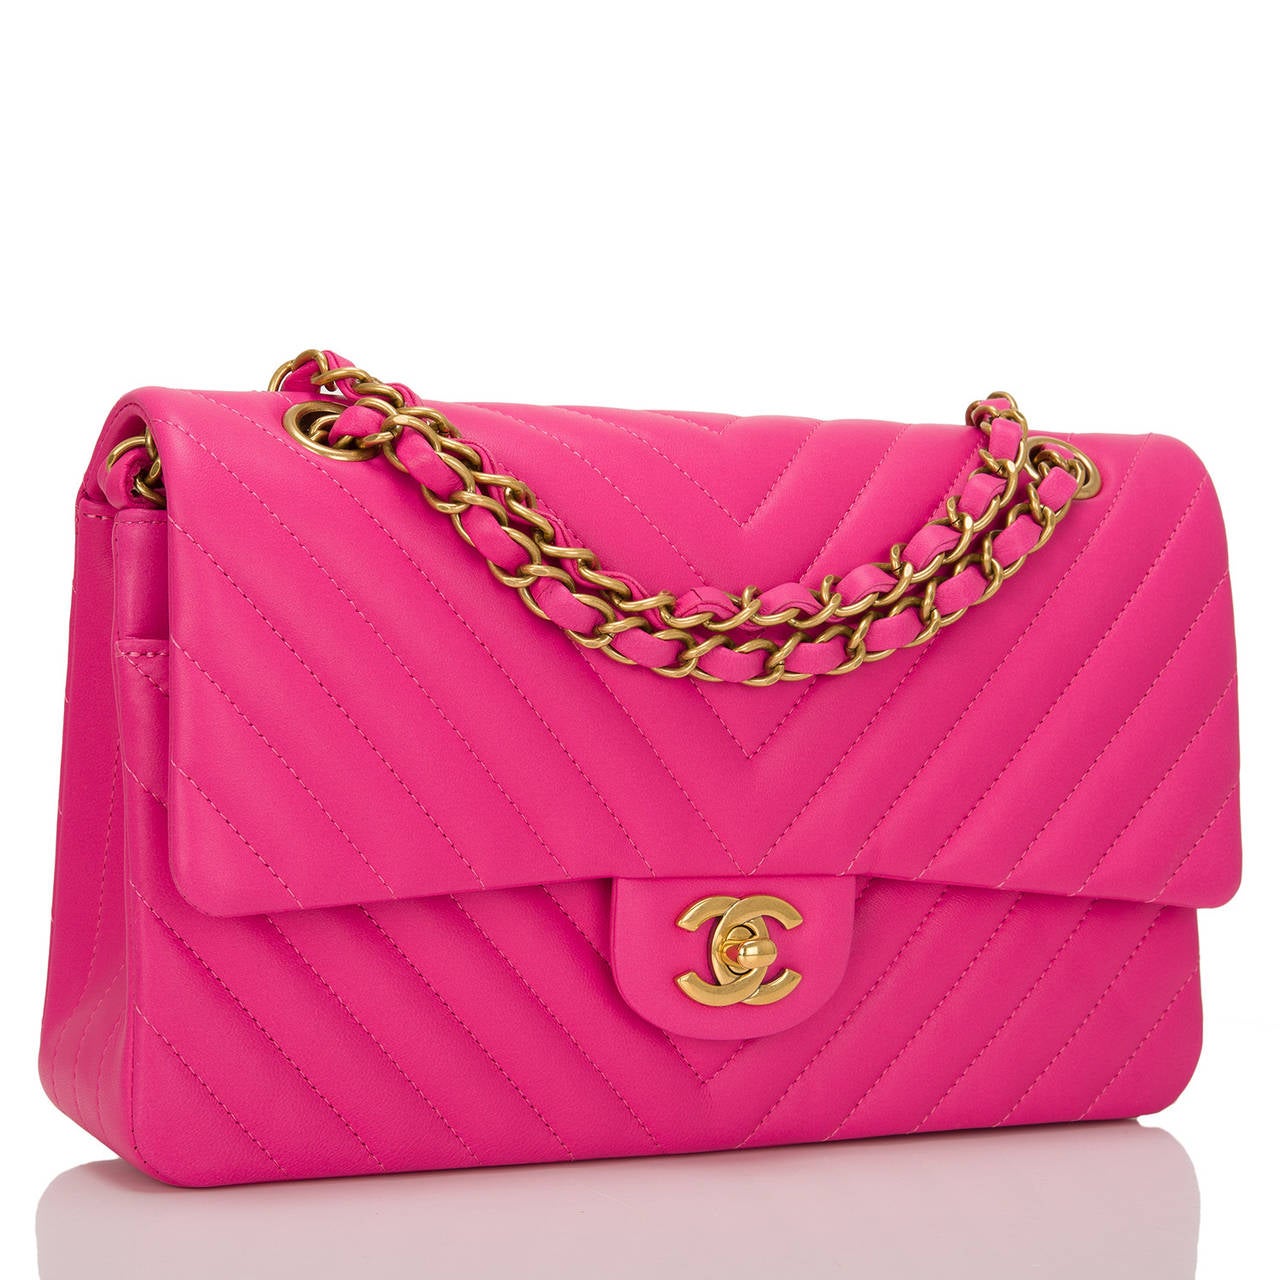 This limited edition Chanel Fuchsia Chevron Medium classic double flap bag in fuchsia lambskin leather and aged gold tone hardware is an edgy take on the iconic Chanel Classic bag. It features a front flap with signature CC turnlock closure, half